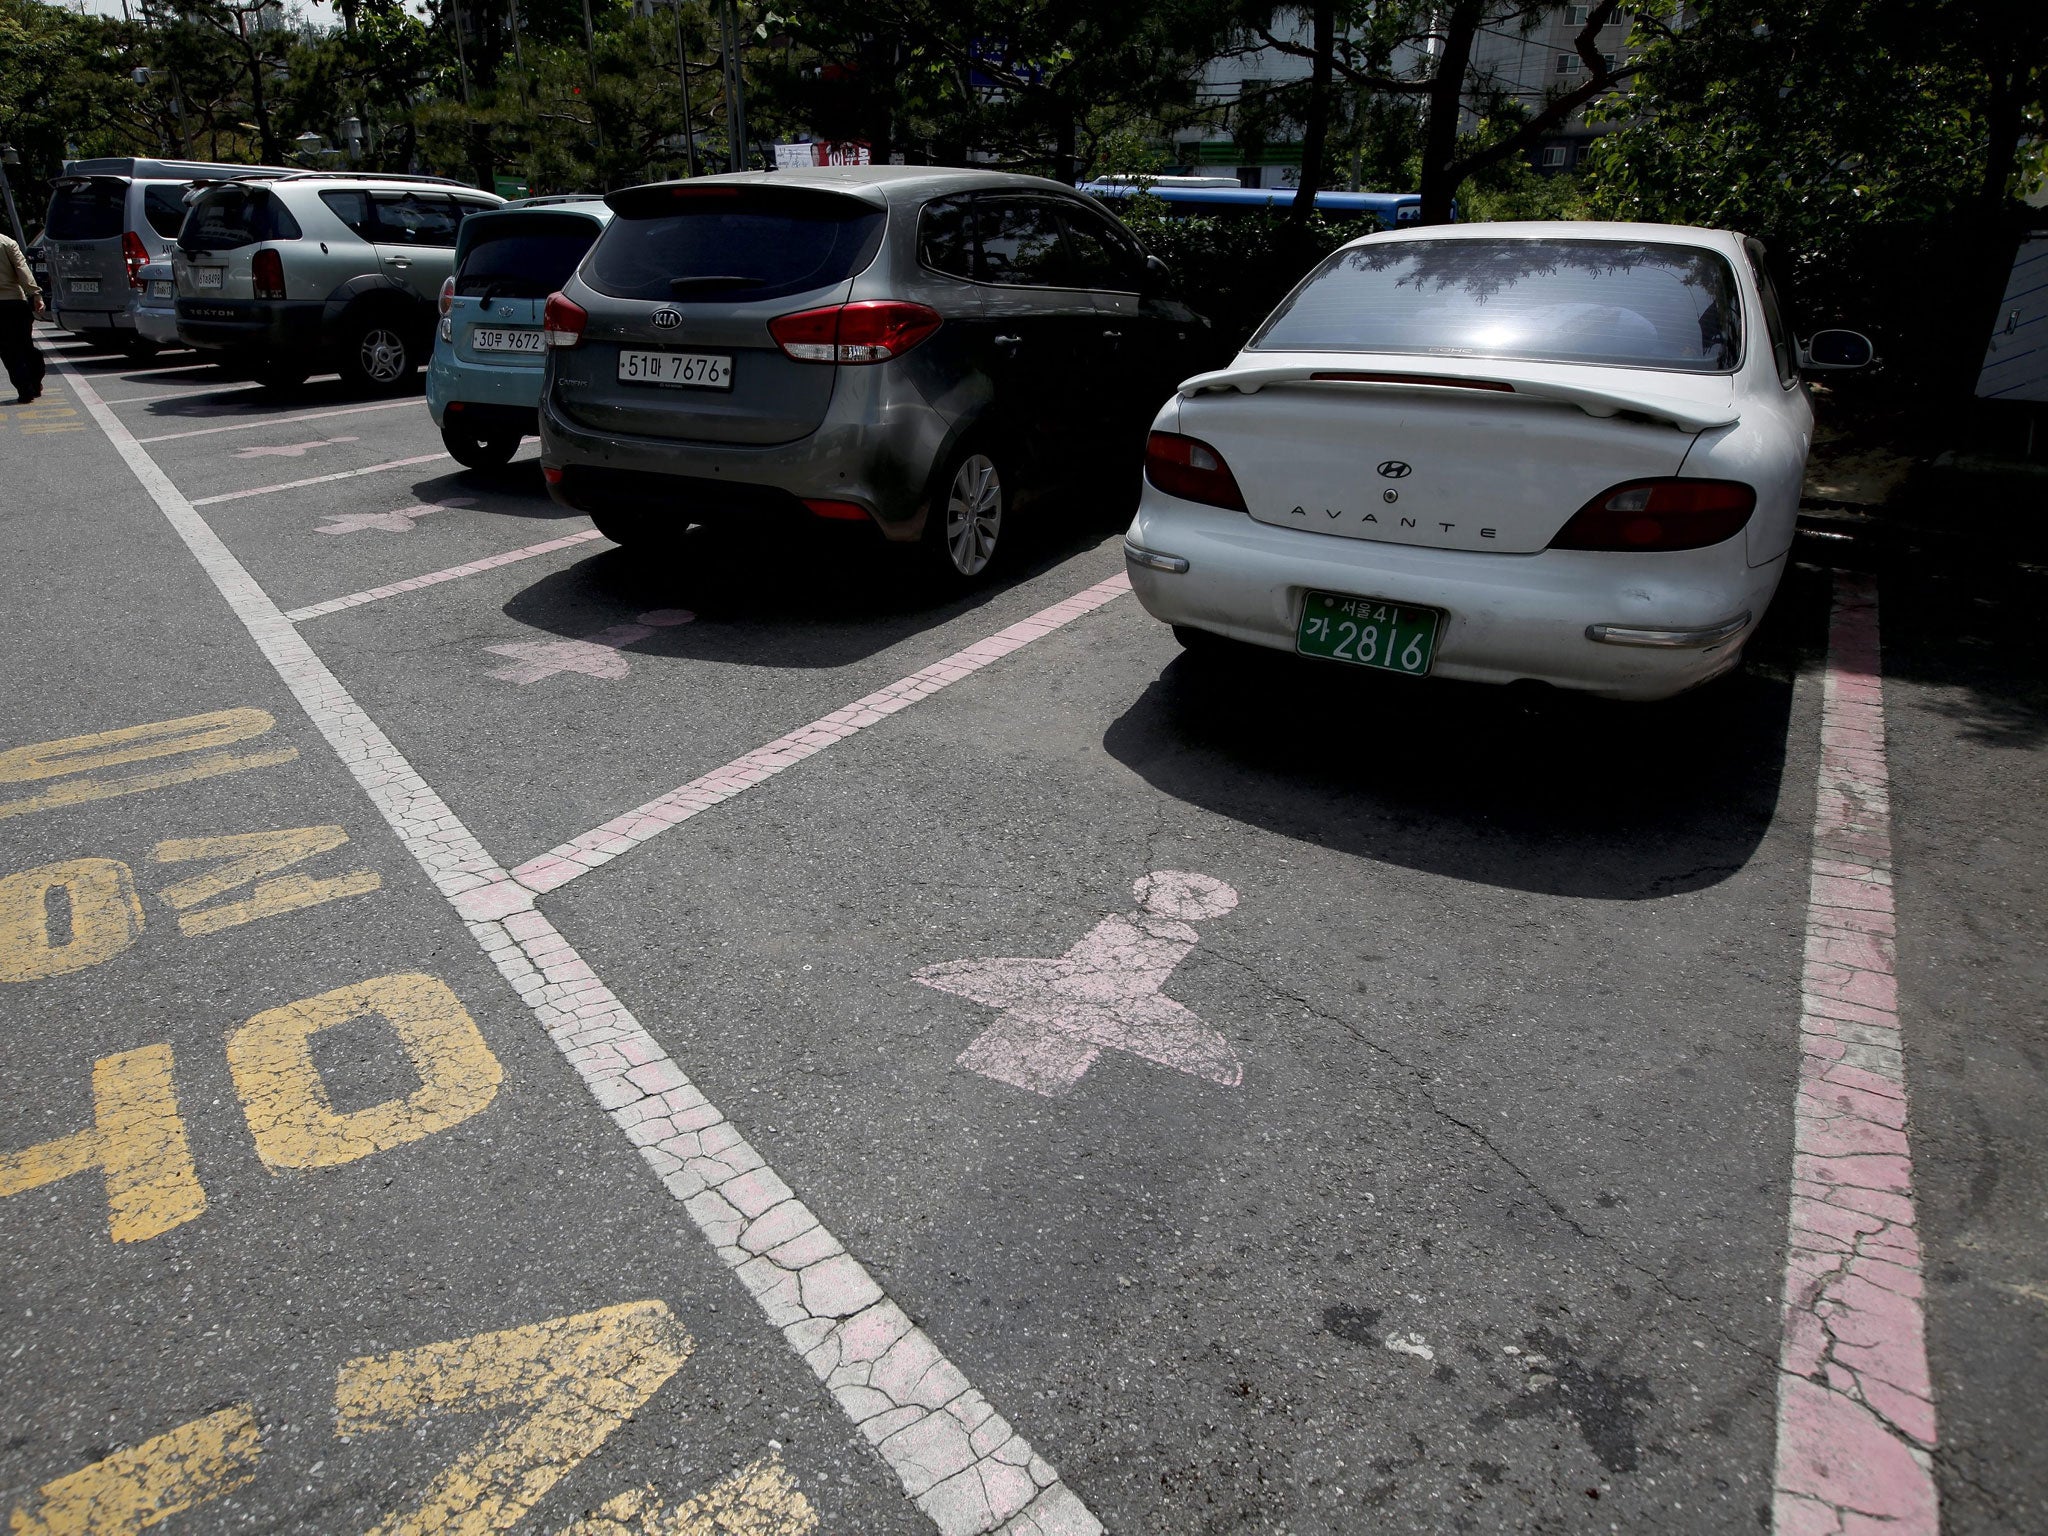 Pink outlines and a figure wearing a skirt mark the 'Women Only' parking slots at the Seodaemun office district in Seoul, South Korea